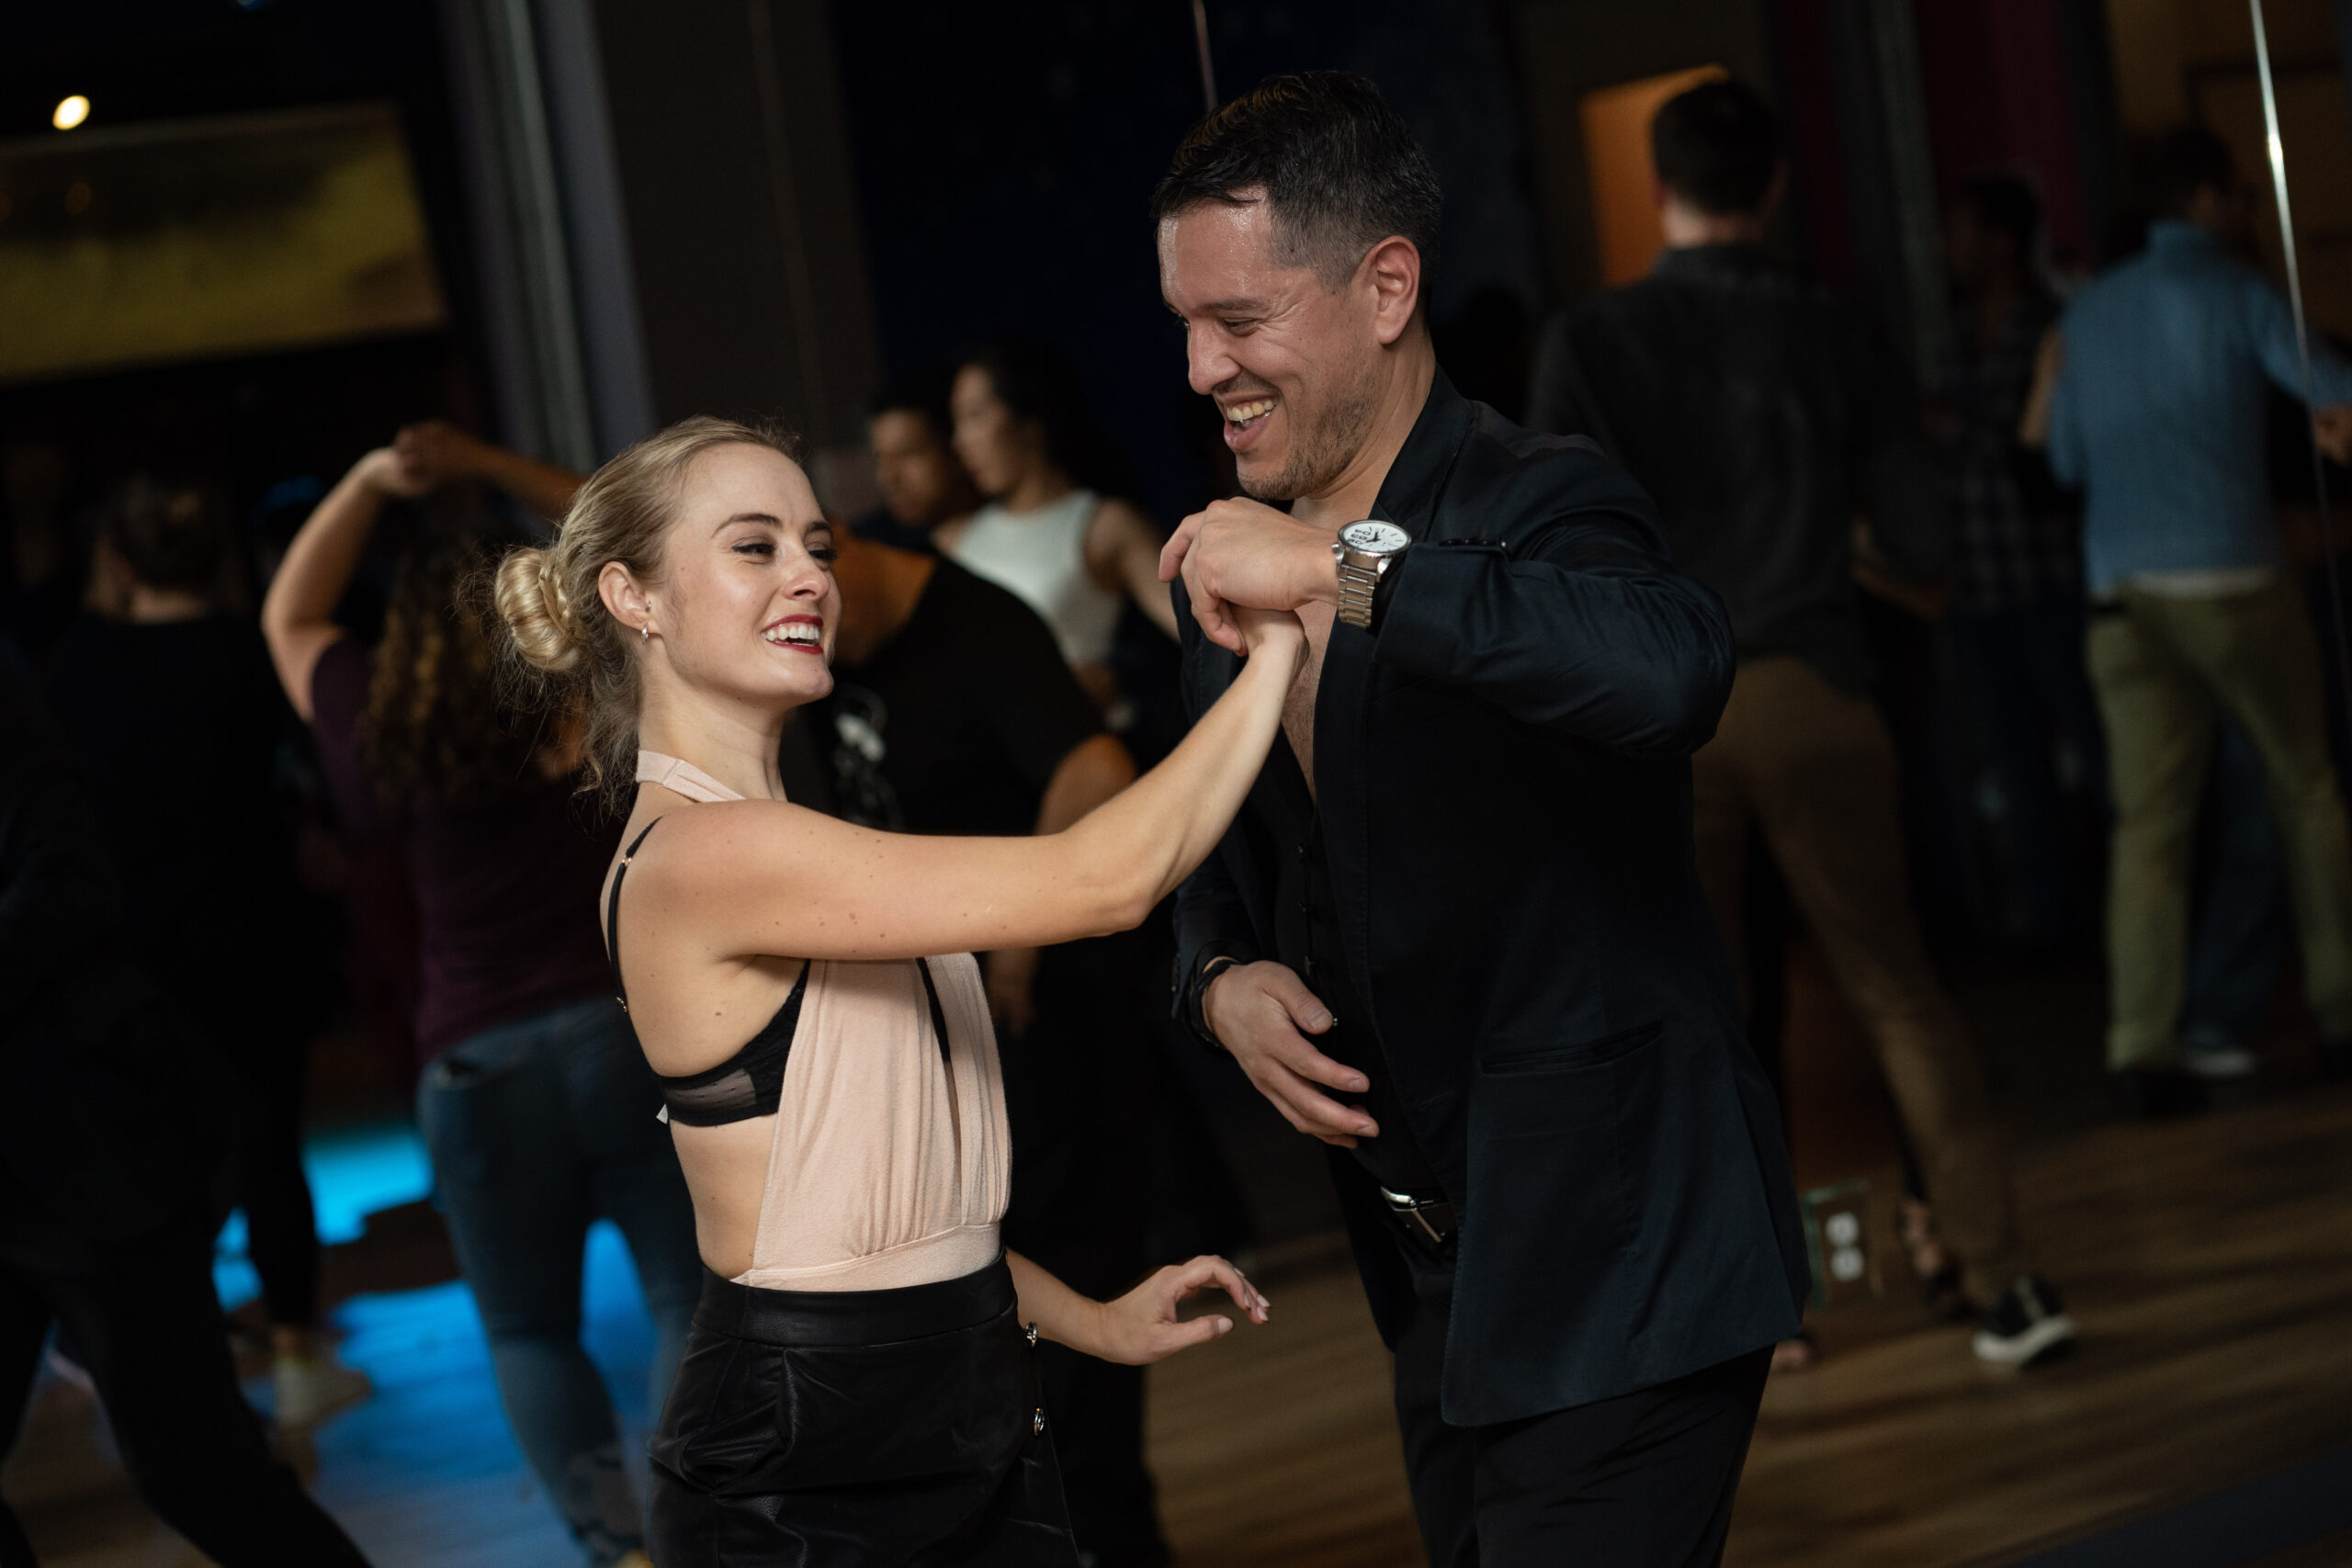 Salsa and bachata classes and social dancing at the Salsa With Silvia studio in DC and Bethesda